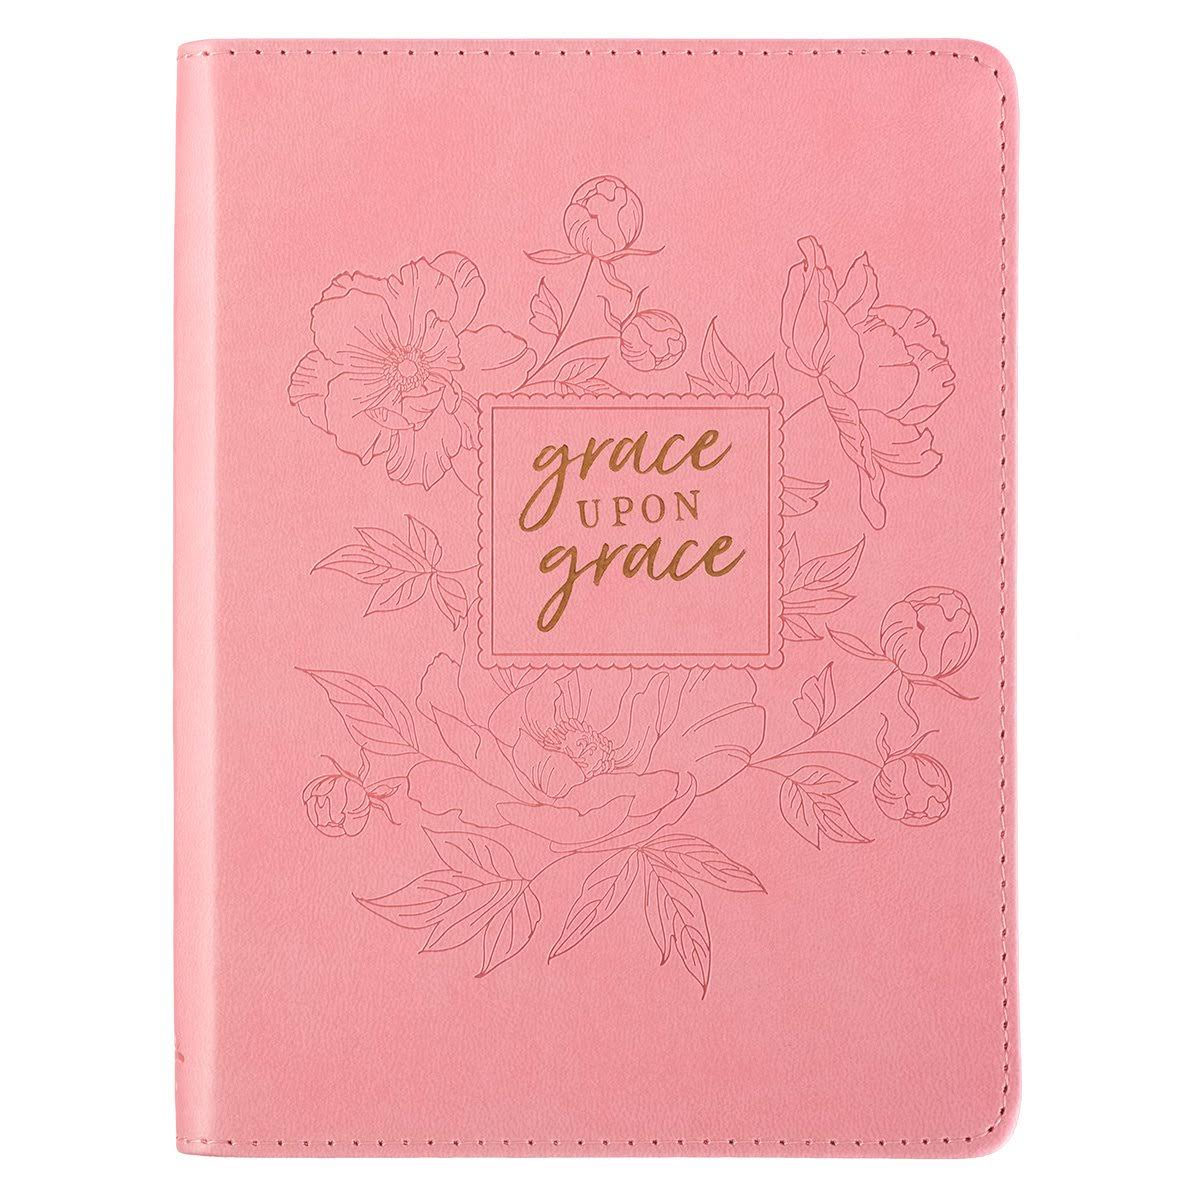 Classic Luxleather Journal: Grace Upon Grace - Christian Art Gifts